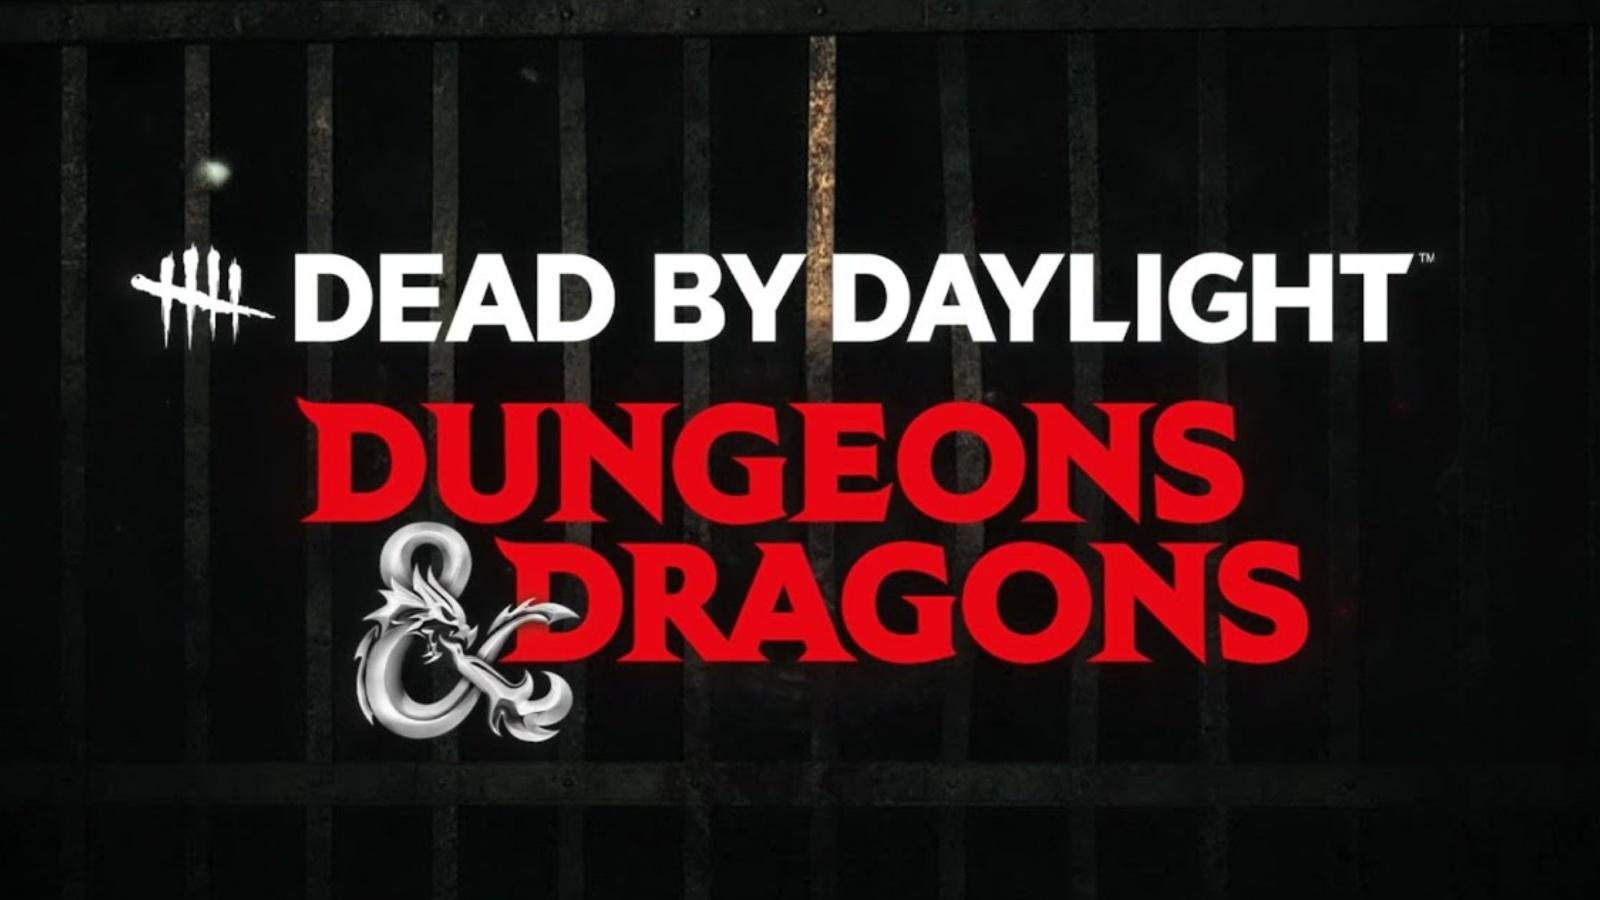 A screenshot featuring Dead by Daylight and Dungeons and Dragons crossover.